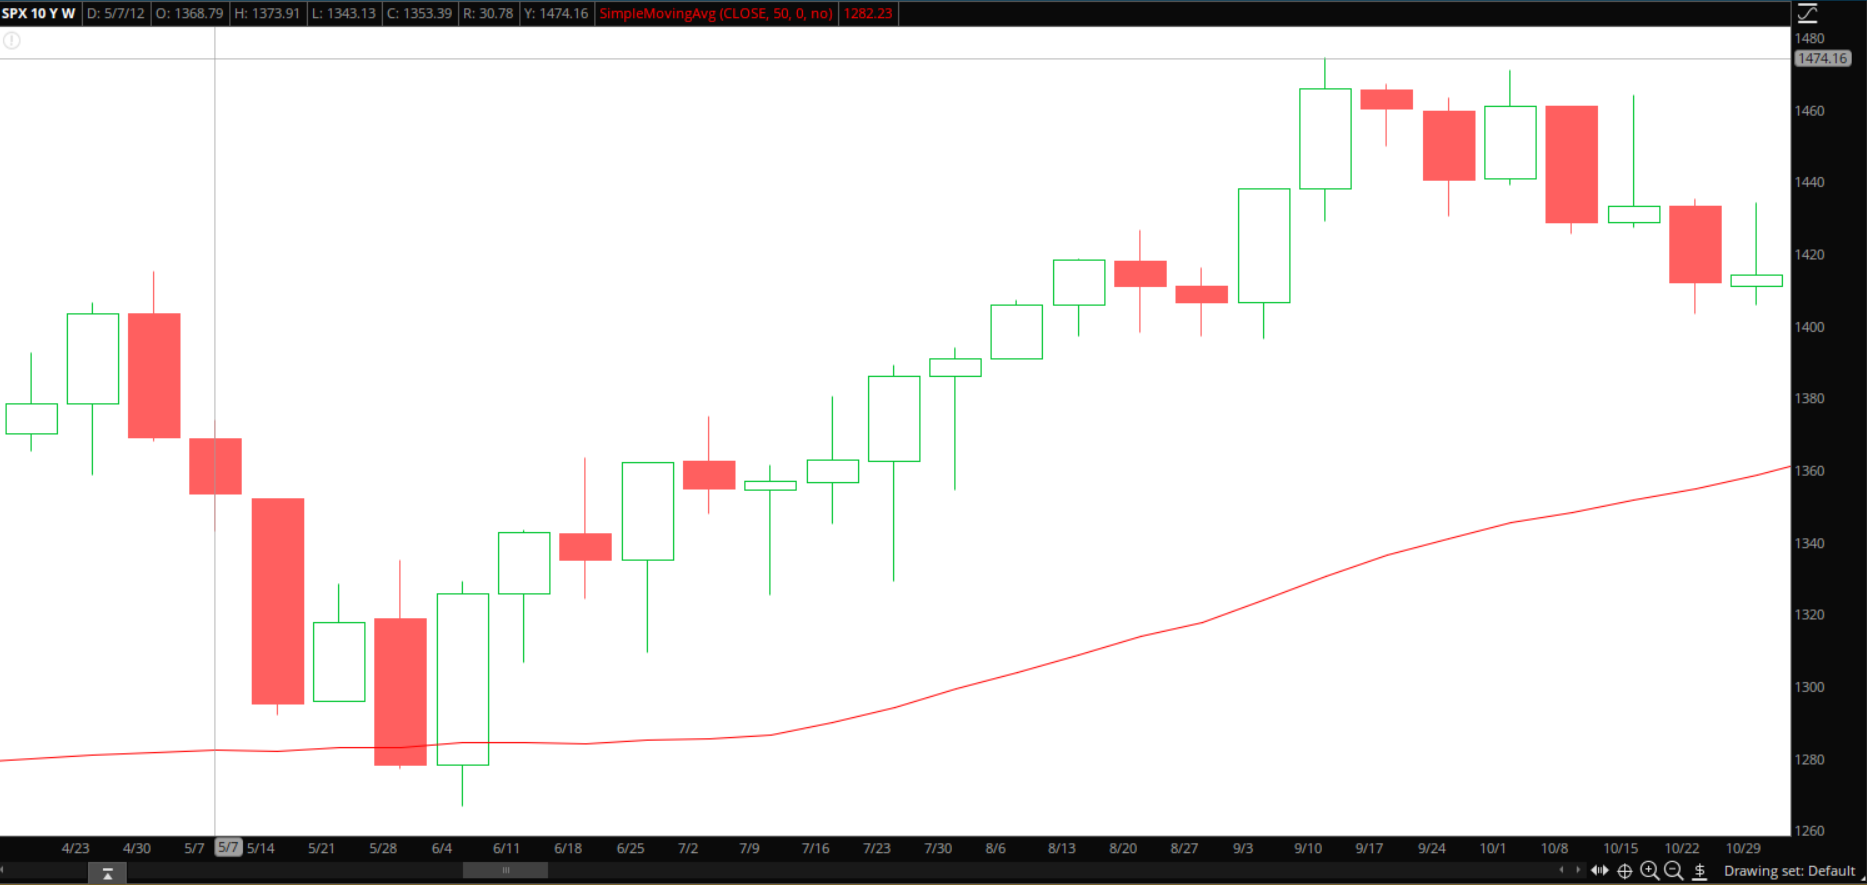 $SPX Chart: Support Bounce at 50-Weekly in 2012